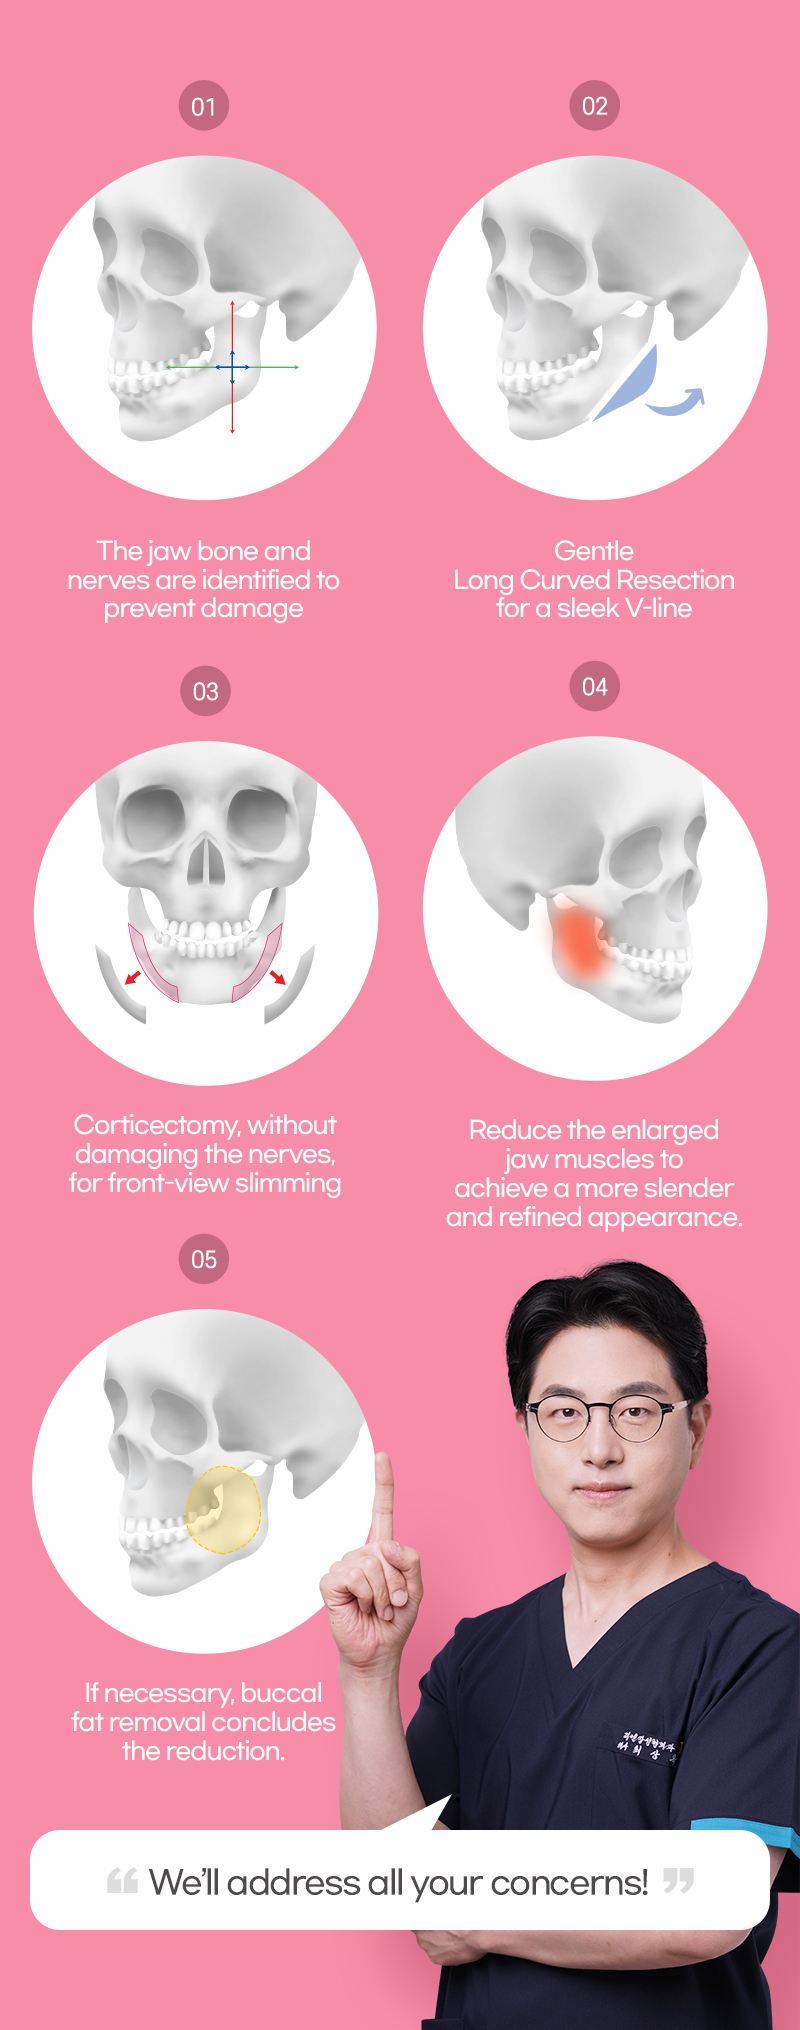 The different procedure performed with Square Jaw reduction